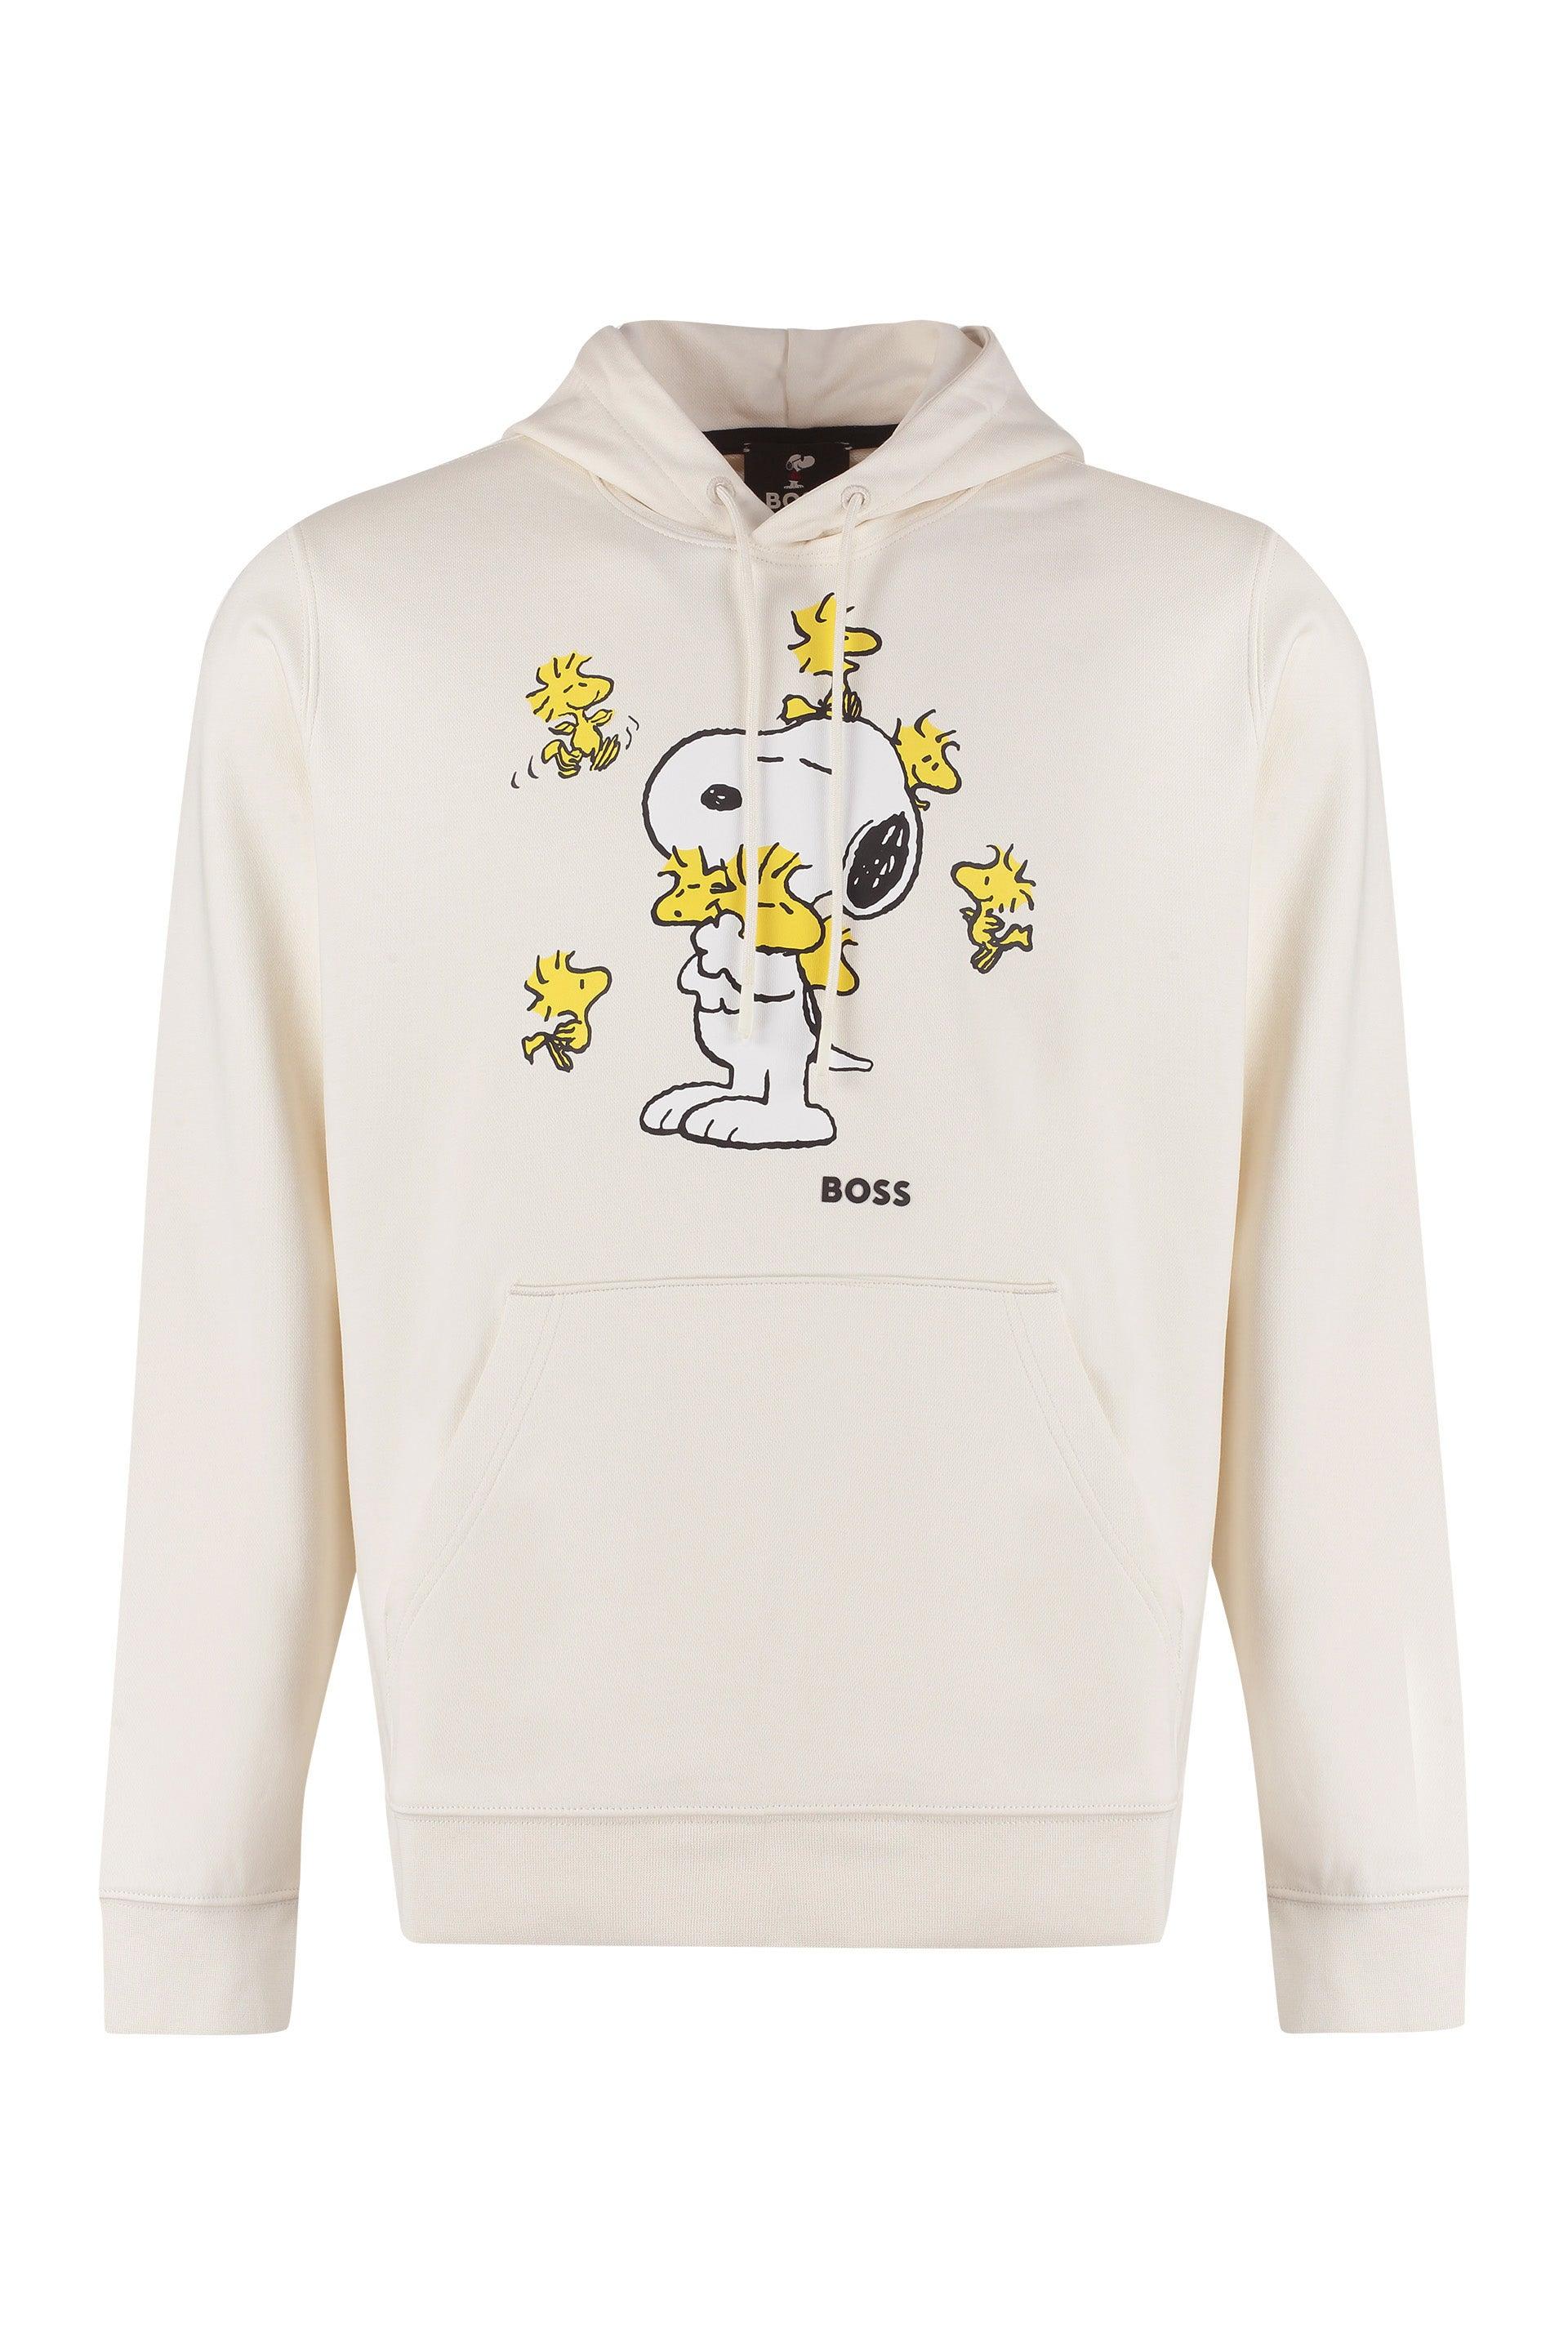 BOSS by HUGO BOSS X Peanuts - Cotton Hoodie in White for Men | Lyst